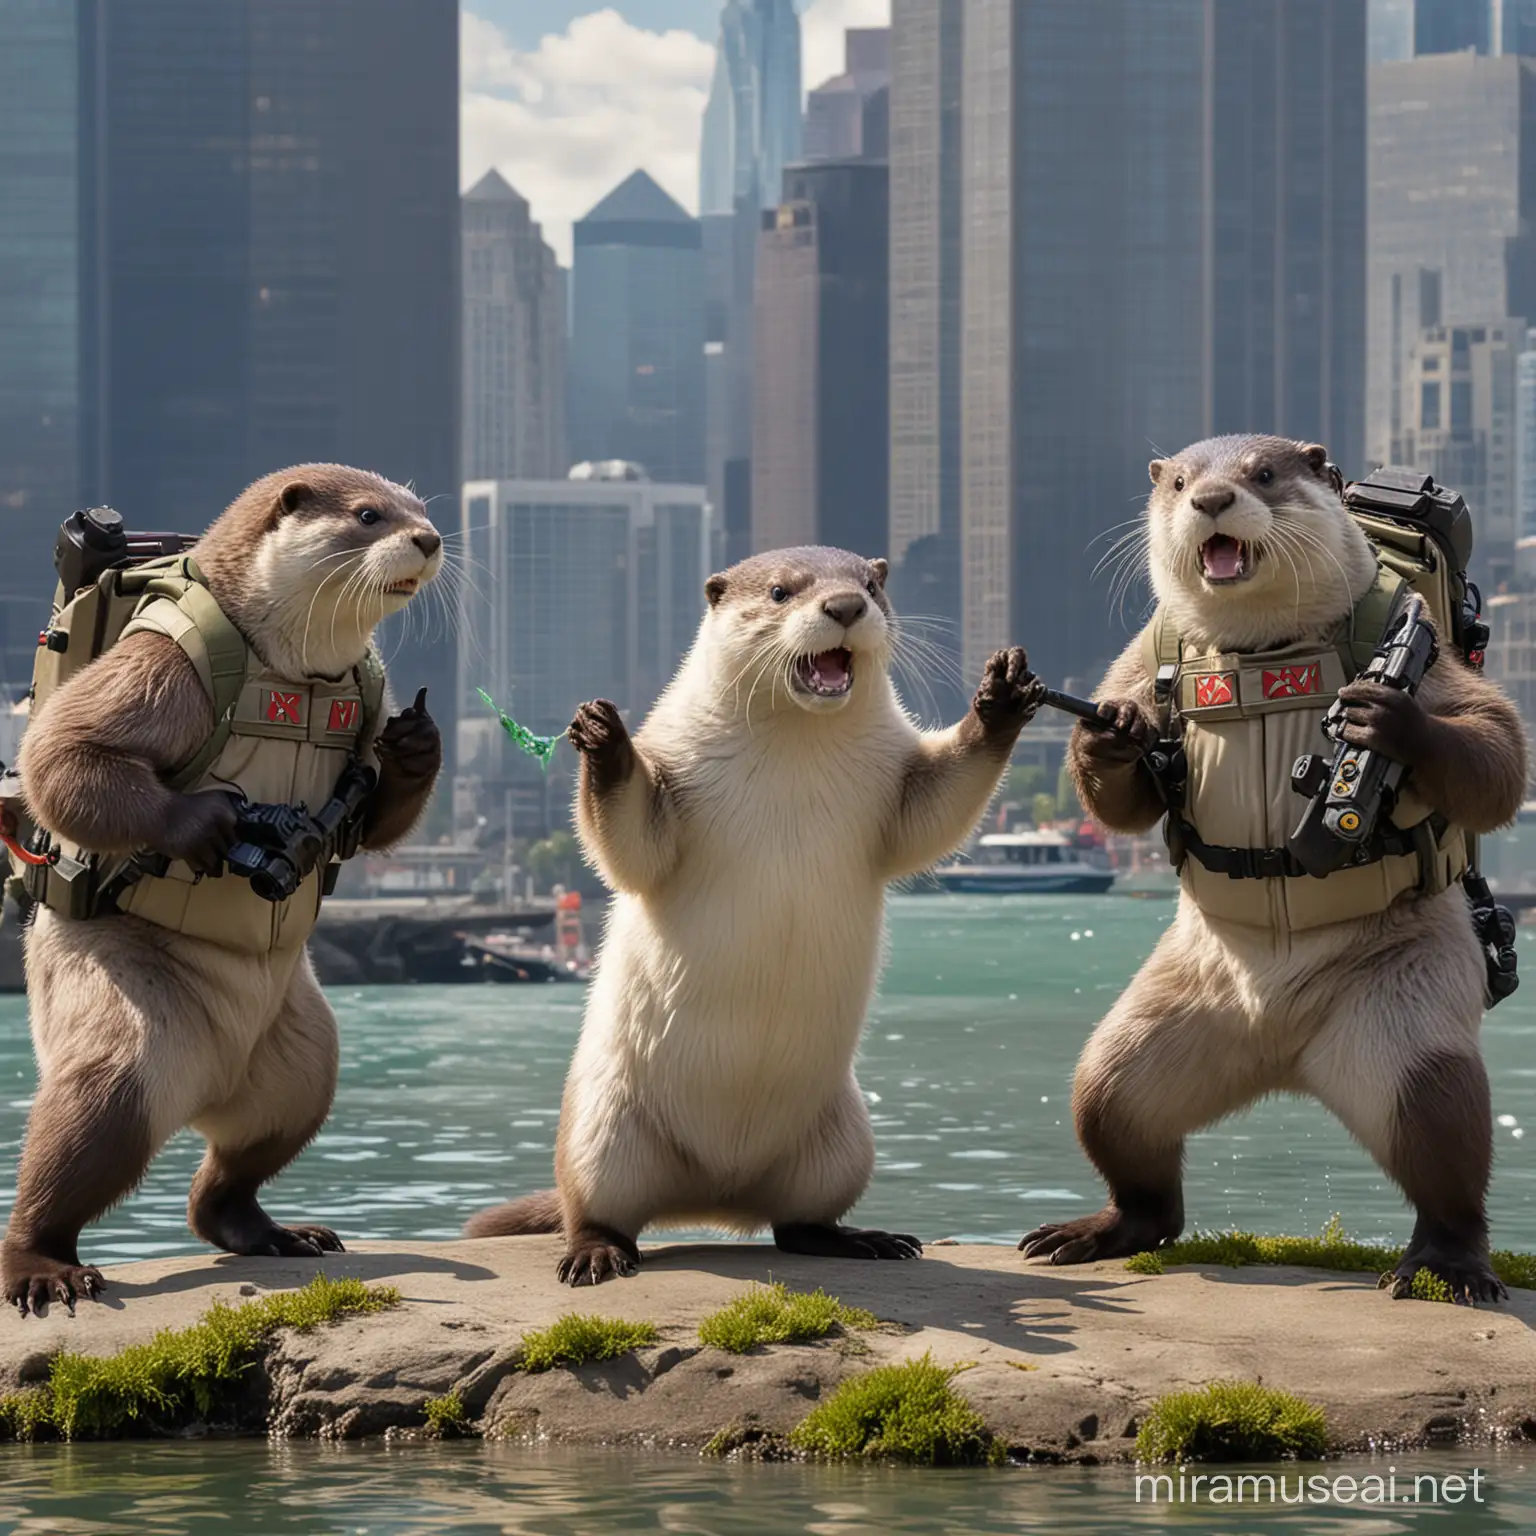 Giant Otter Skyscraper Battle with Ghostbusters